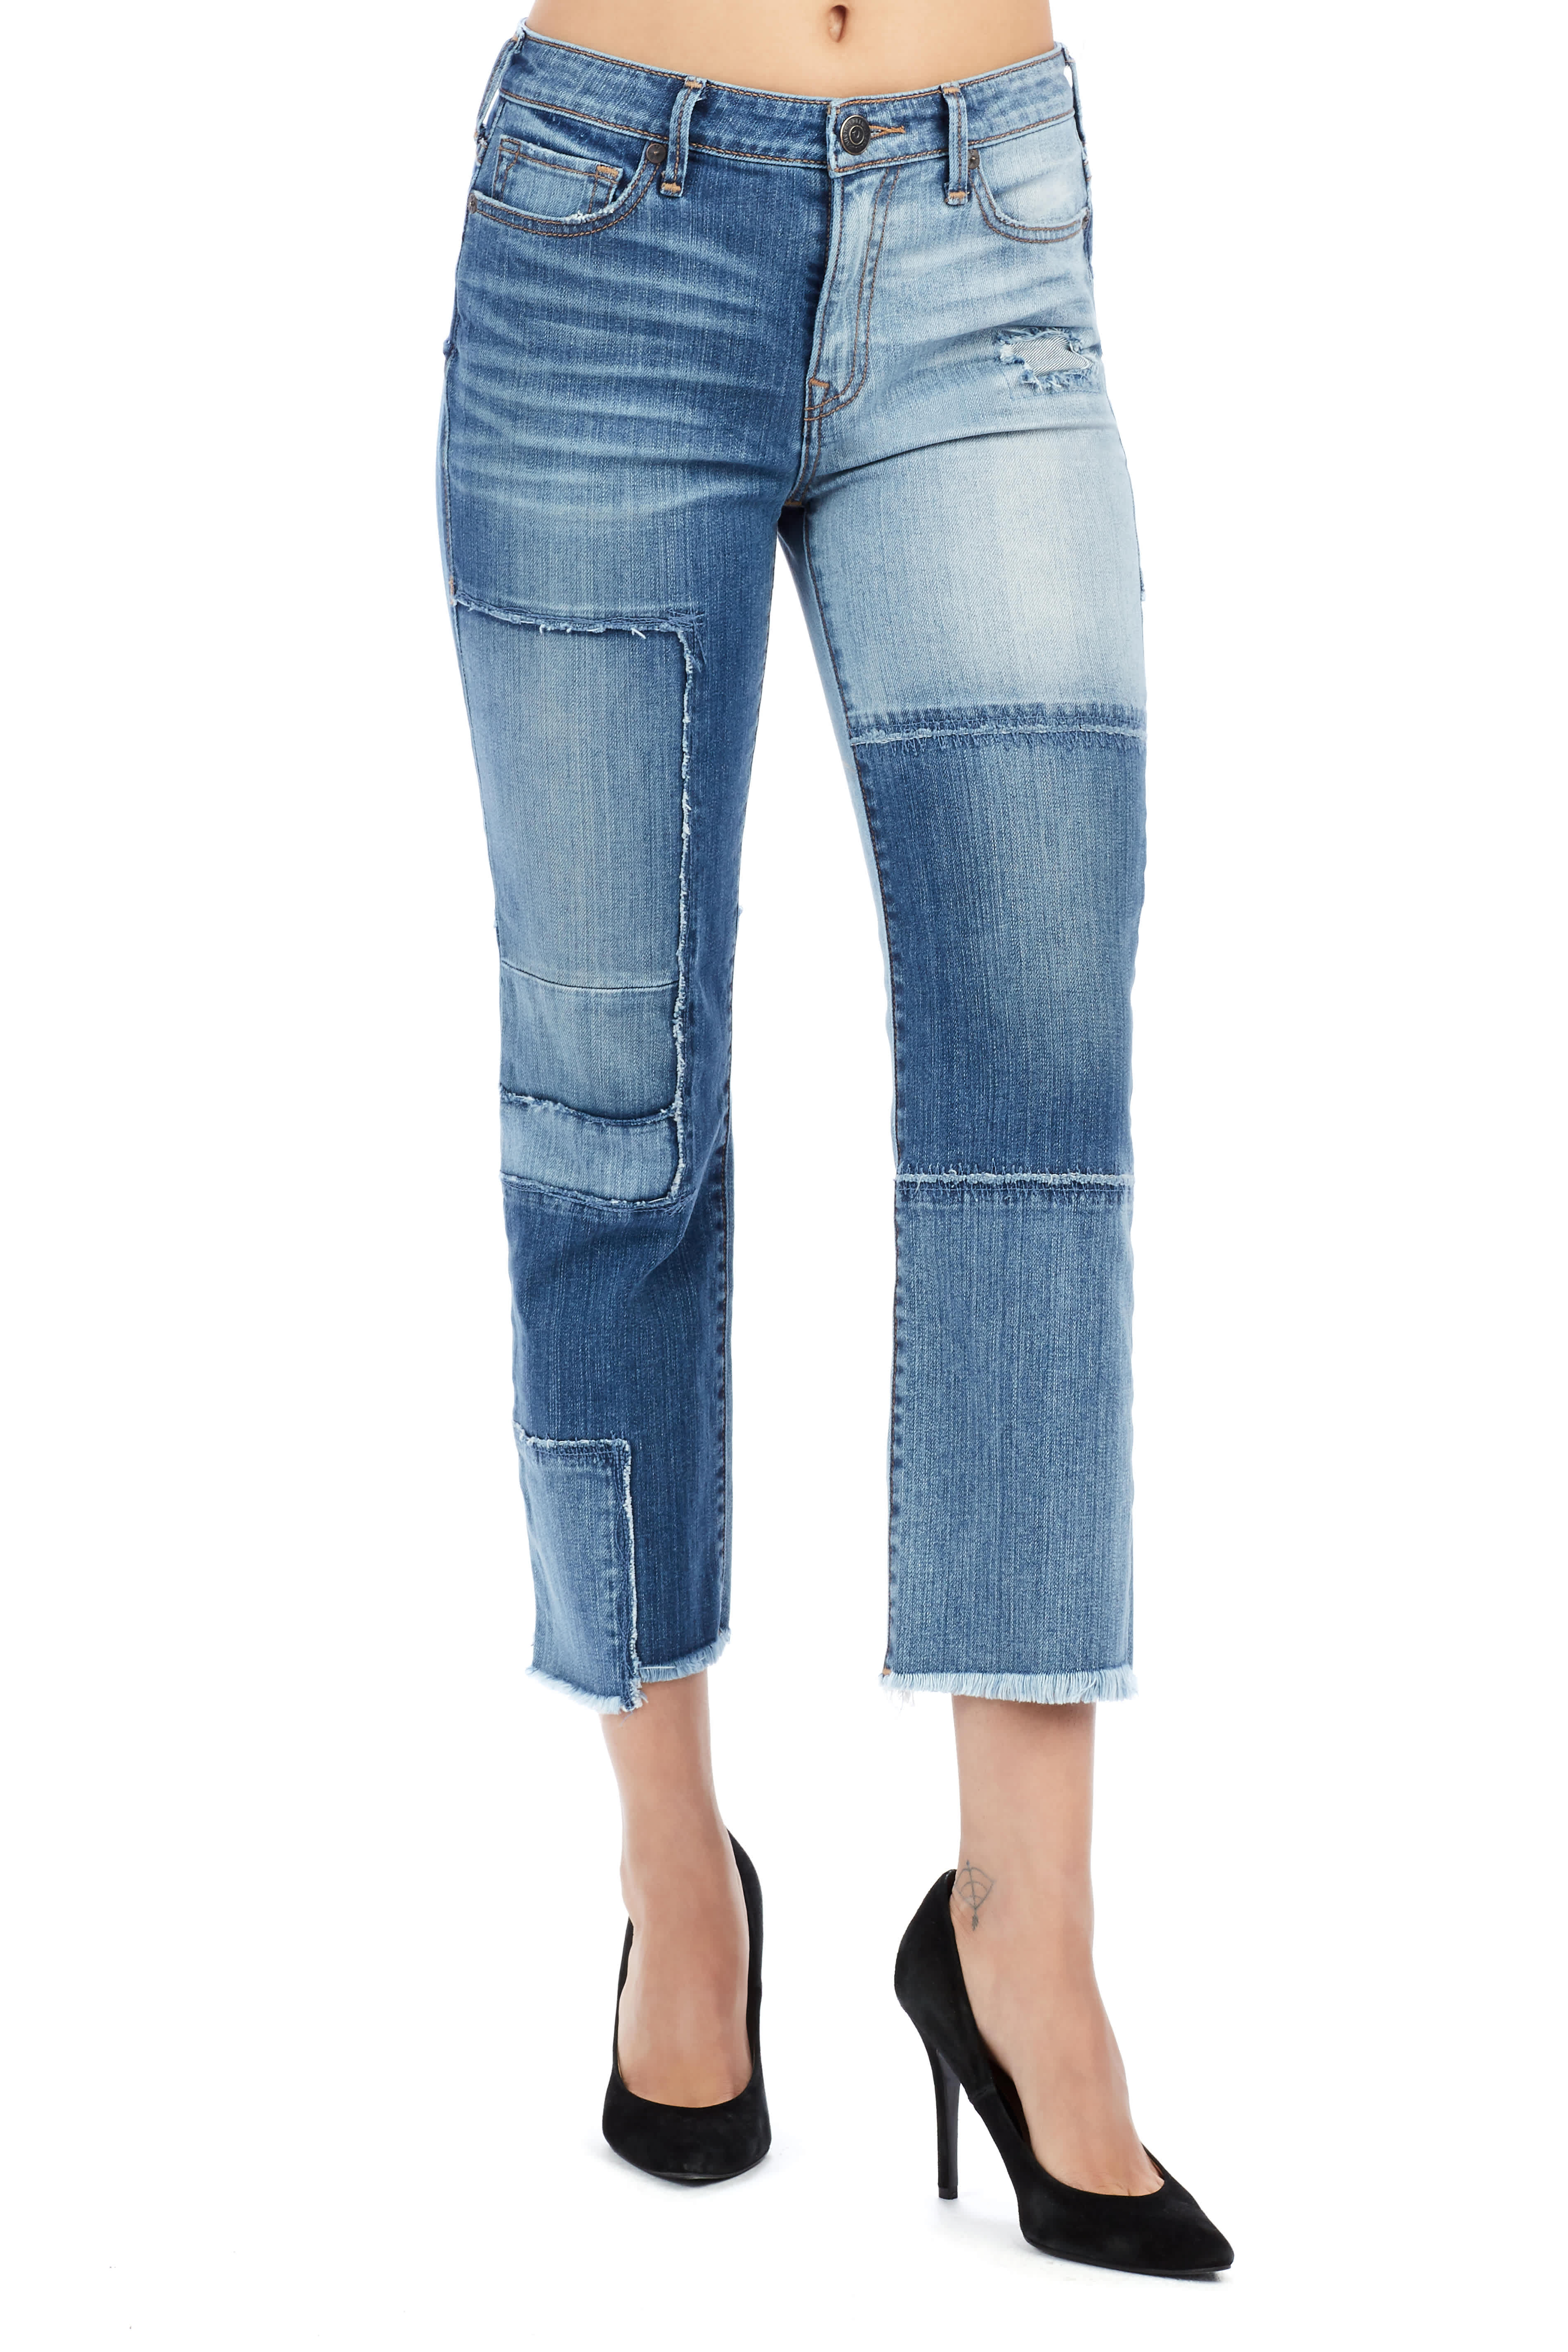 STOVE PIPE  DECONSTRUCTED STRAIGHT WOMENS JEAN